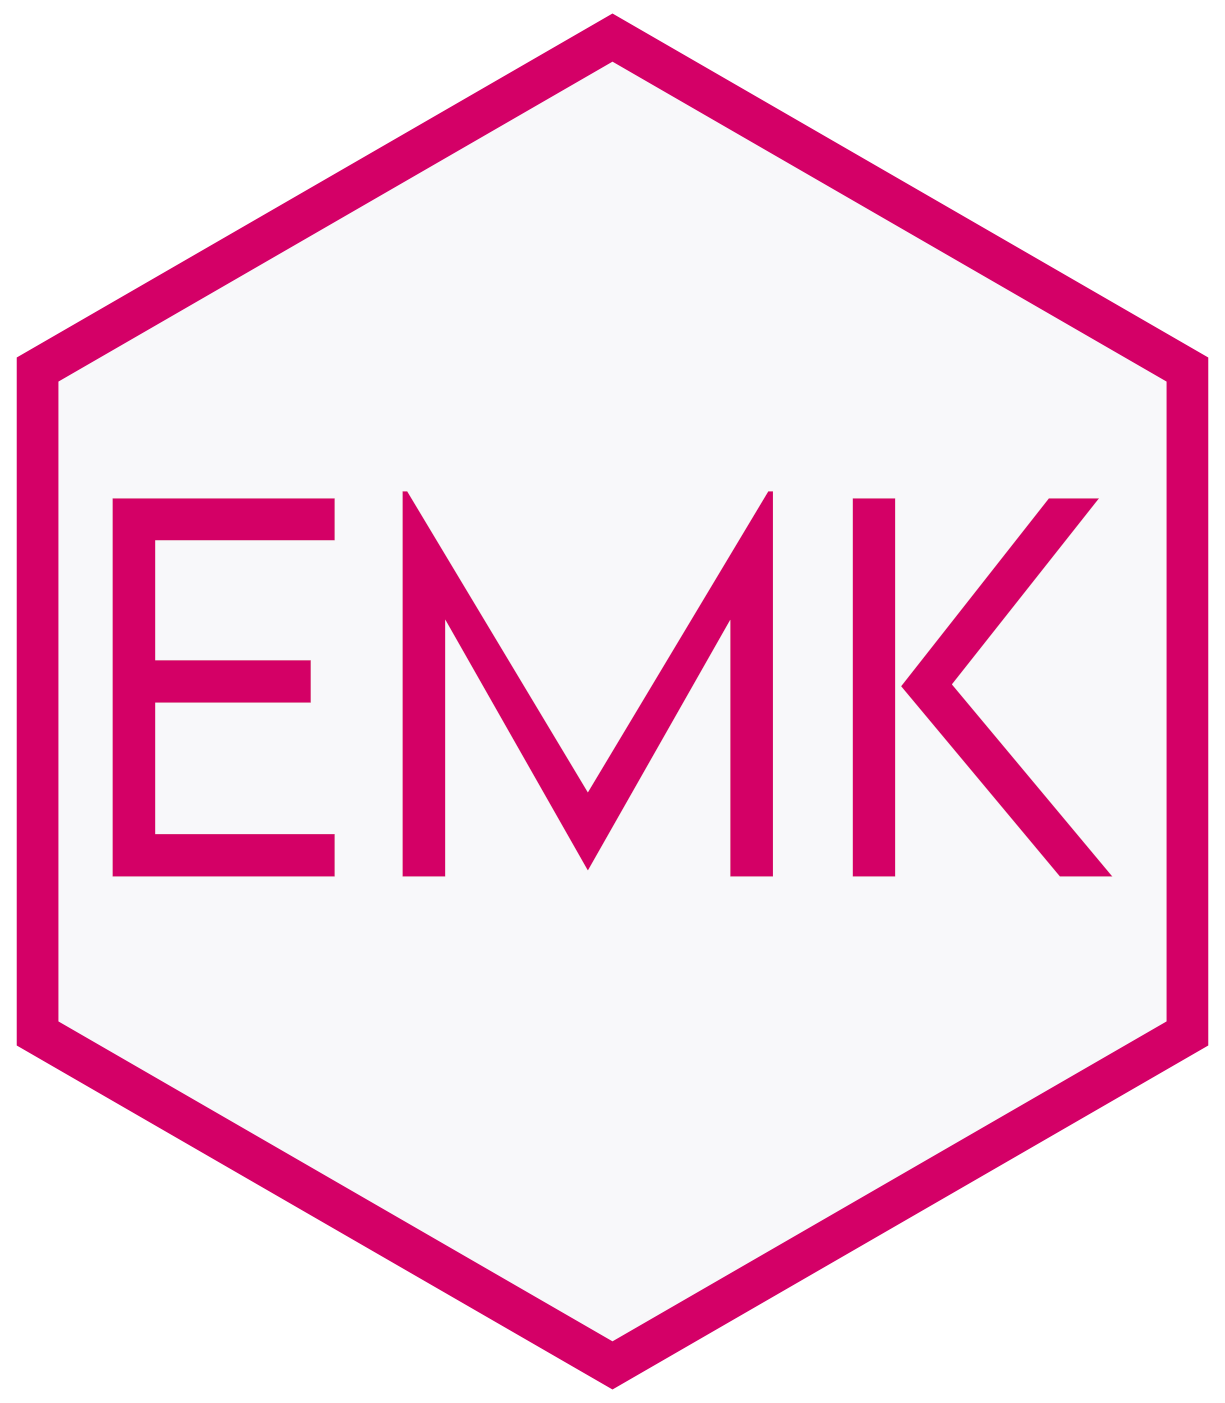 A hexagon with a bright pink outline. Inside it, the letters E, M and K in the
same bright pink, on a white background
